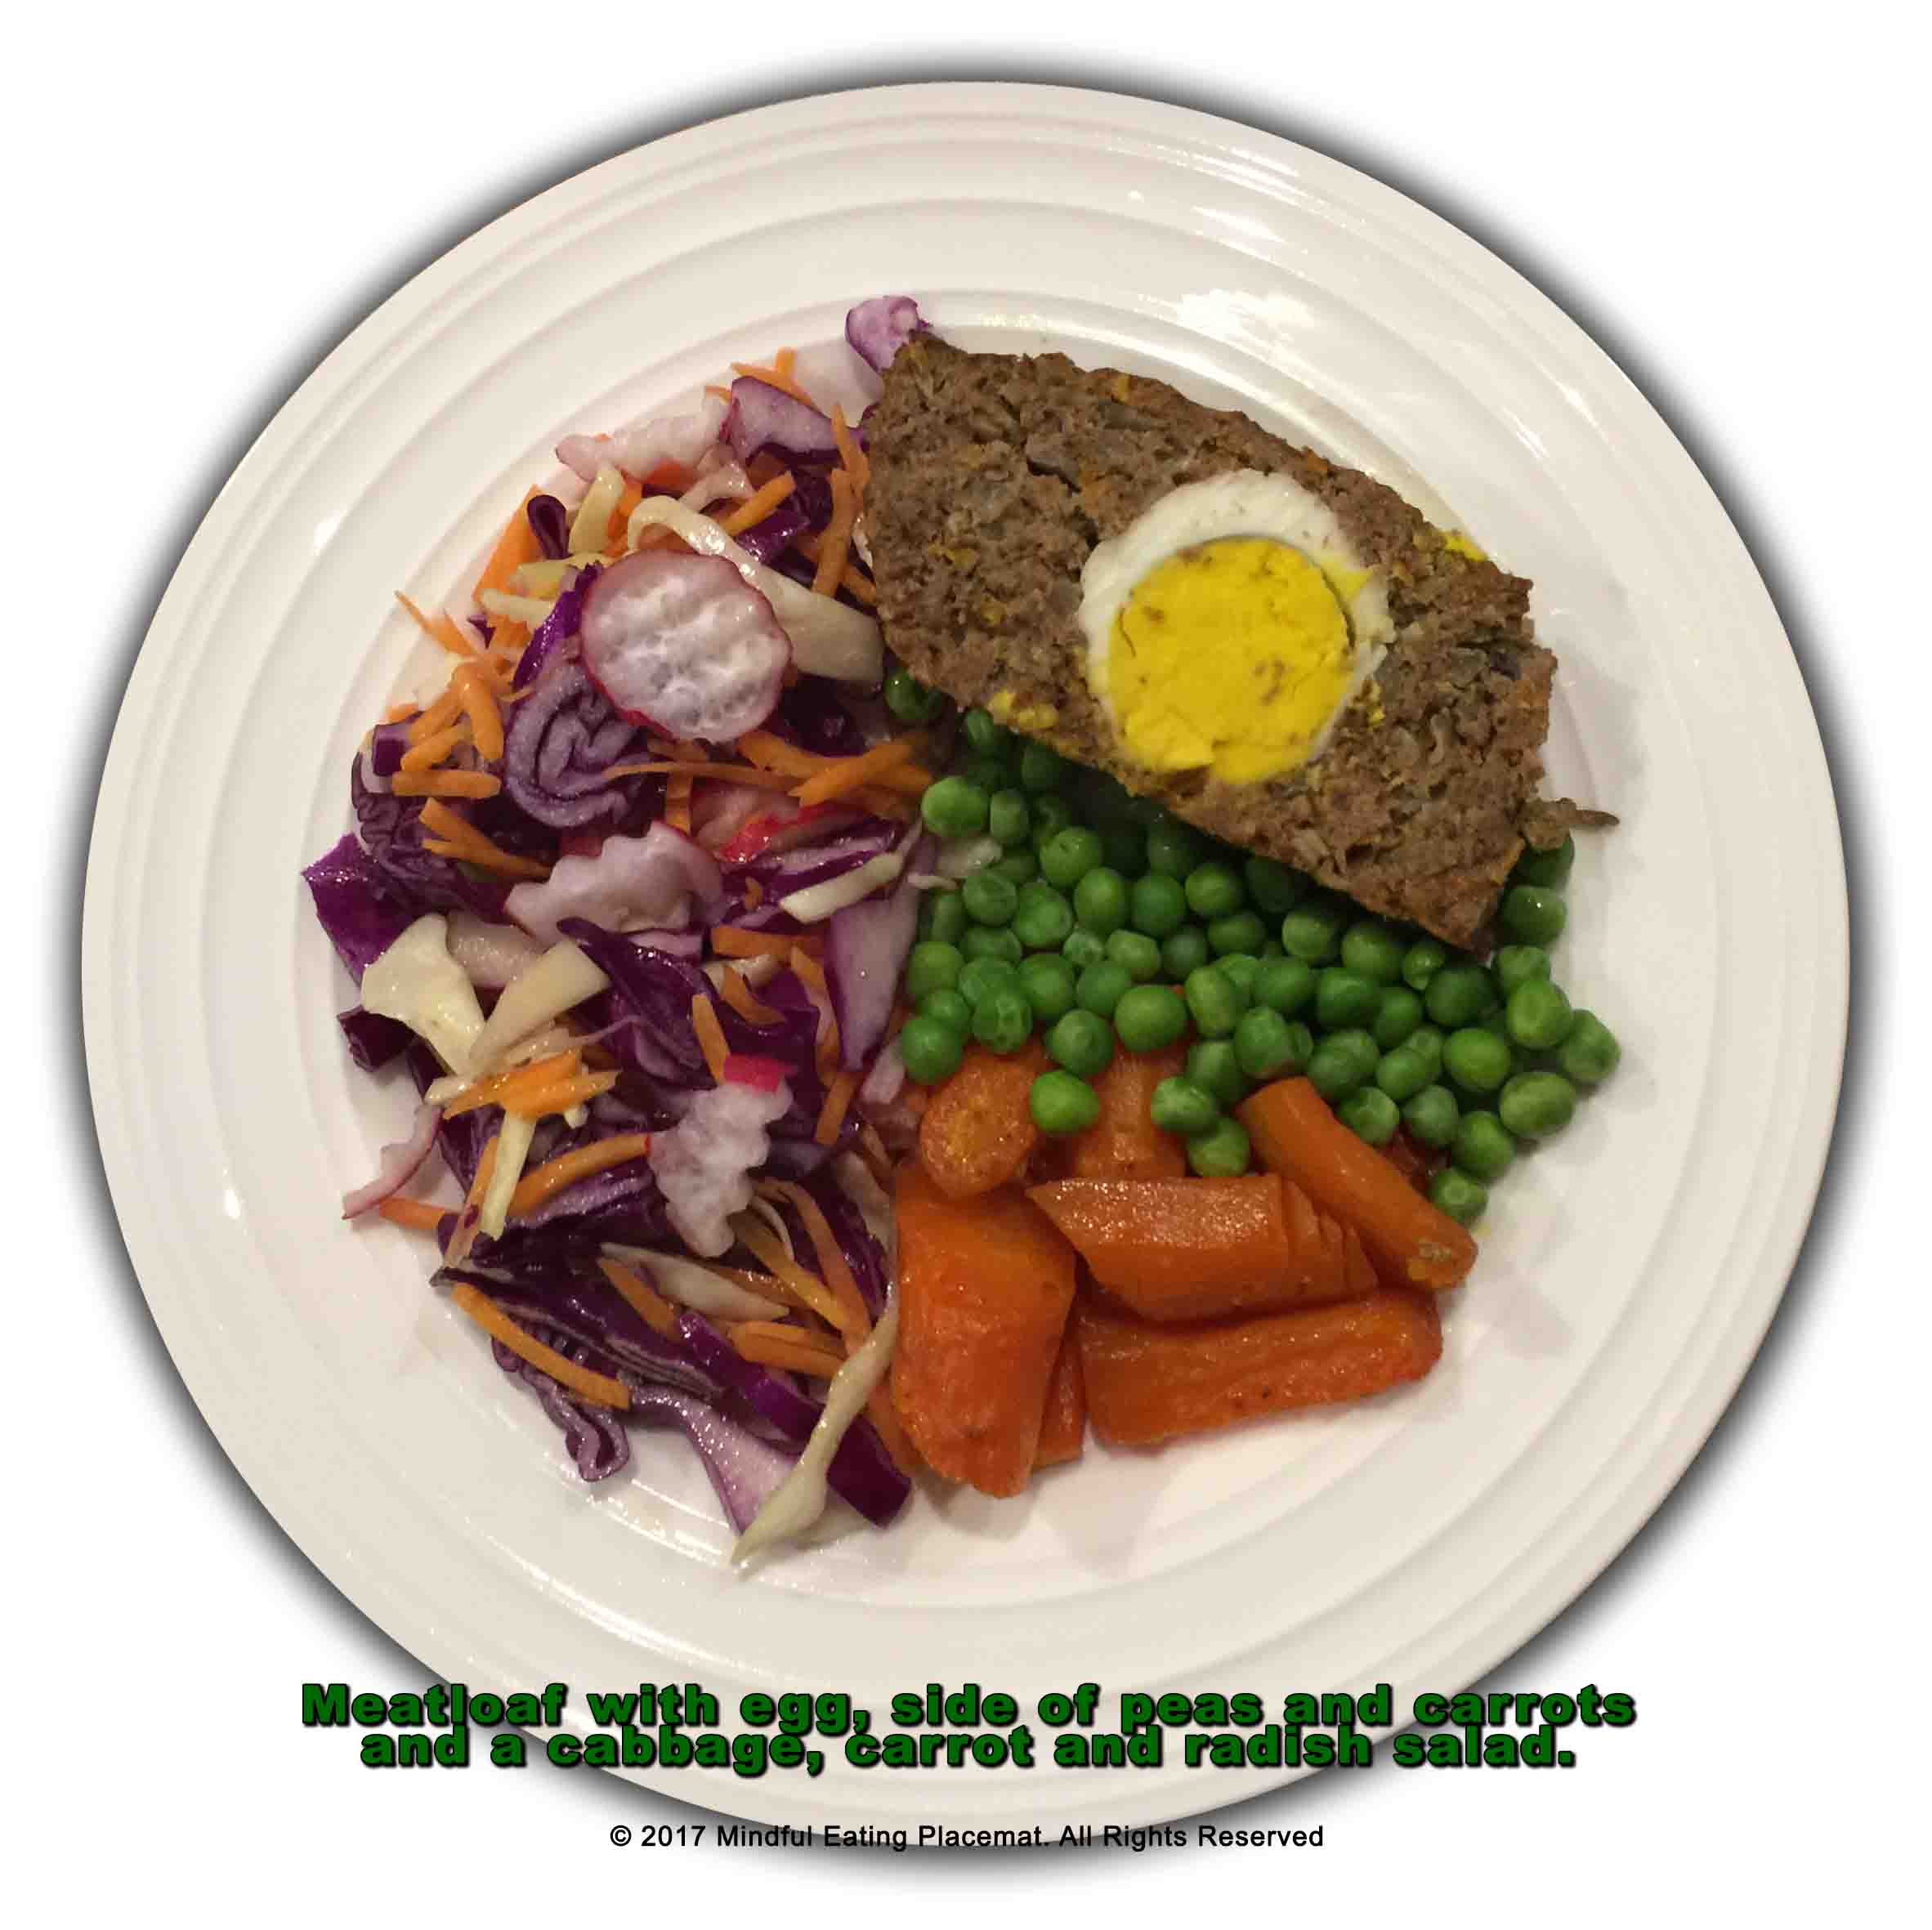 Meatloaf with egg and a side of peas and carrots with a salad